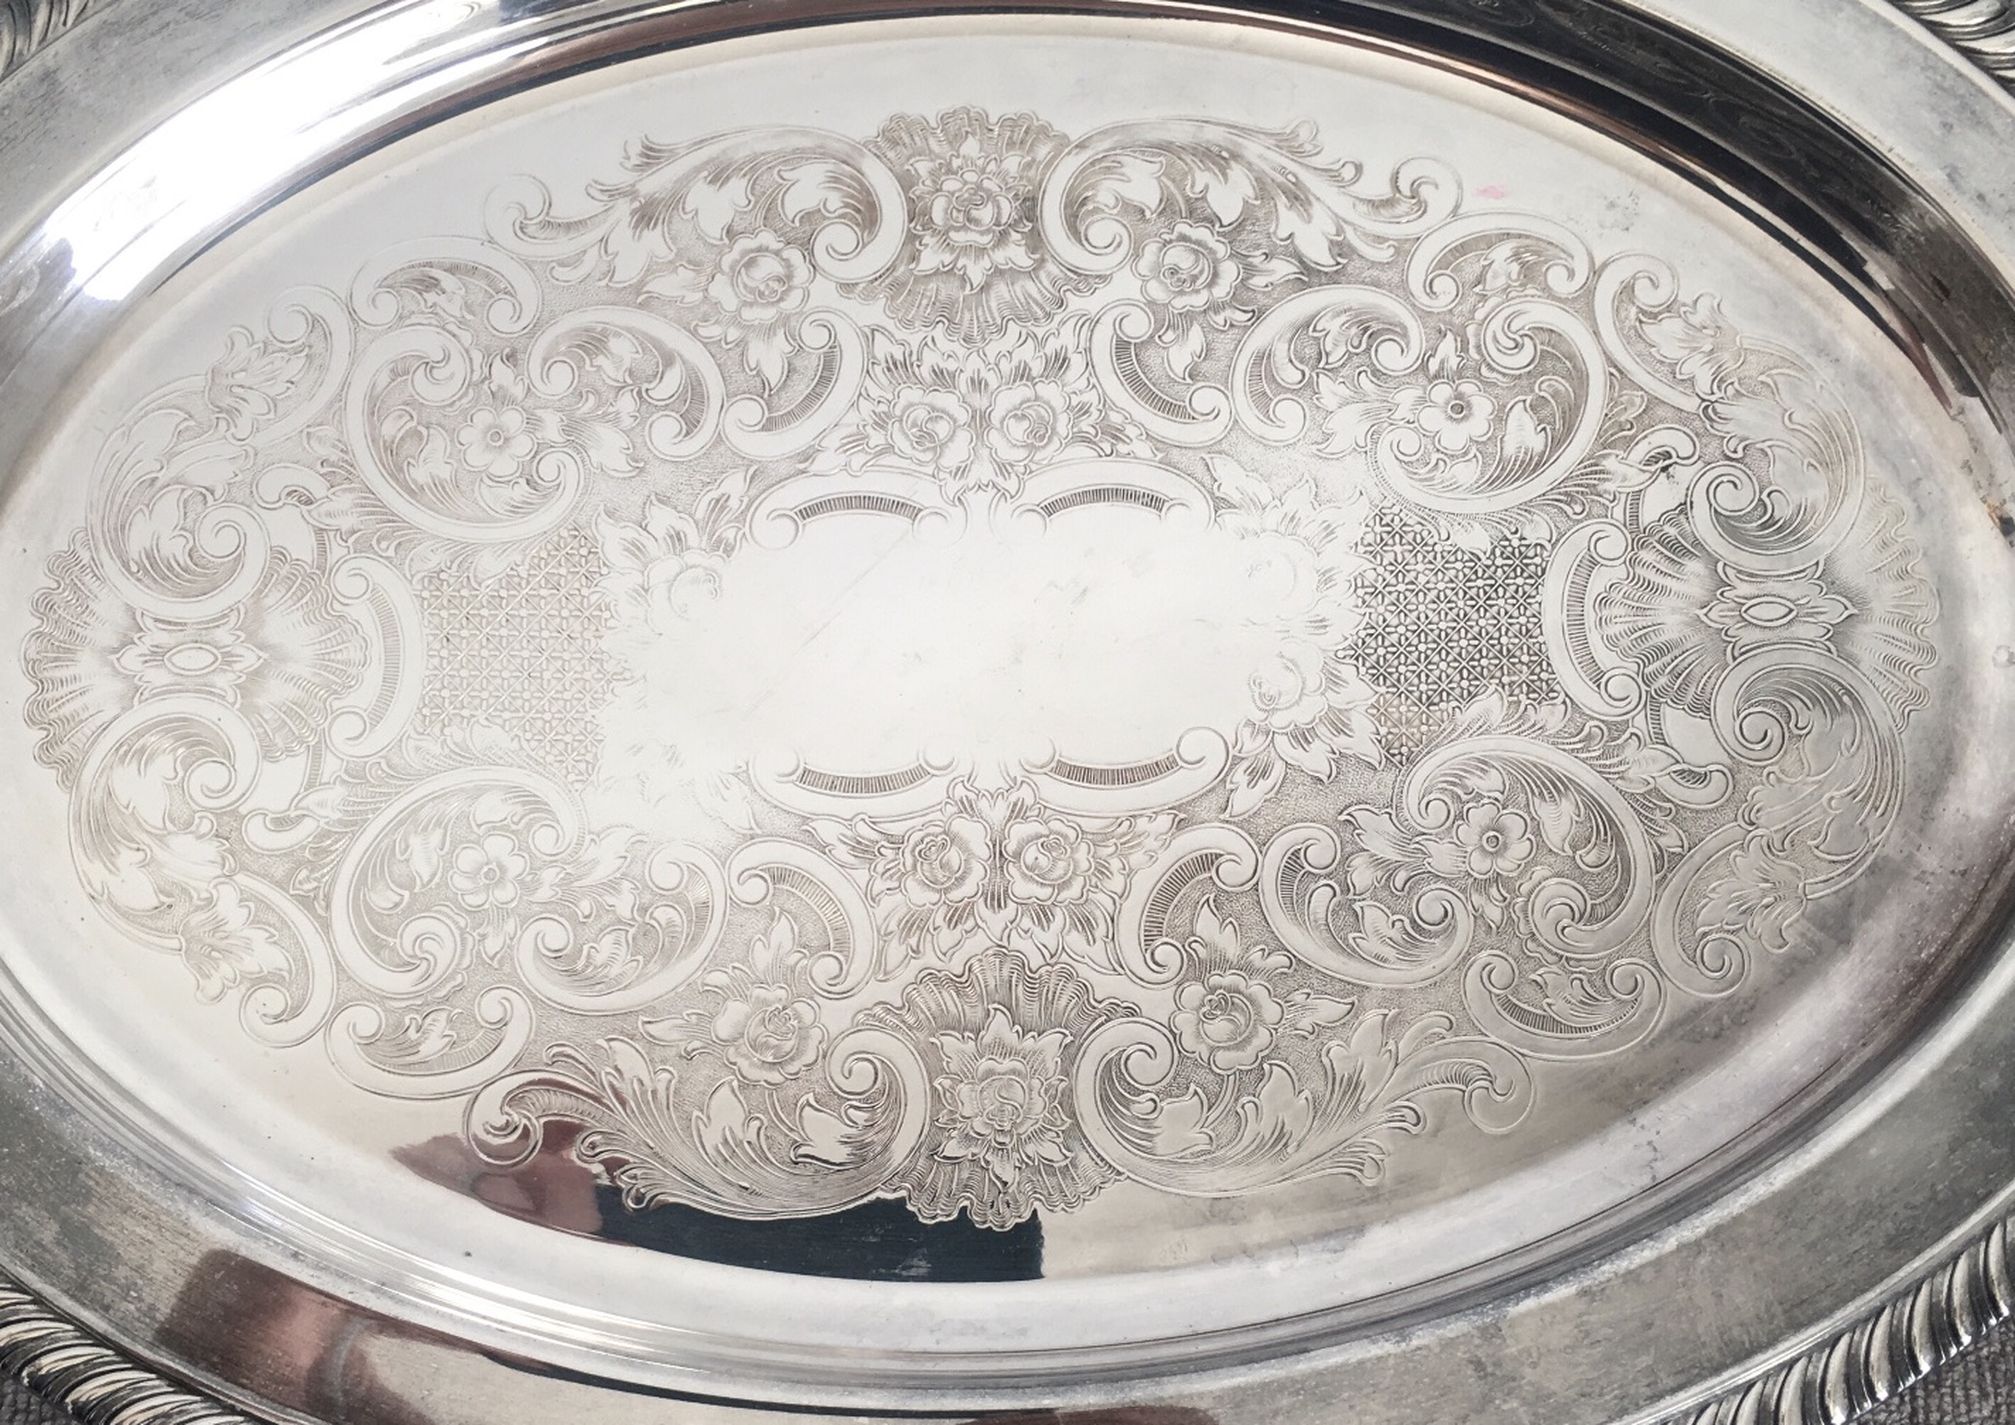 Leonard Silver Mfg Co Silverplated Hollowware 16” Oval Tray/Serving Platter with Gadroon edge